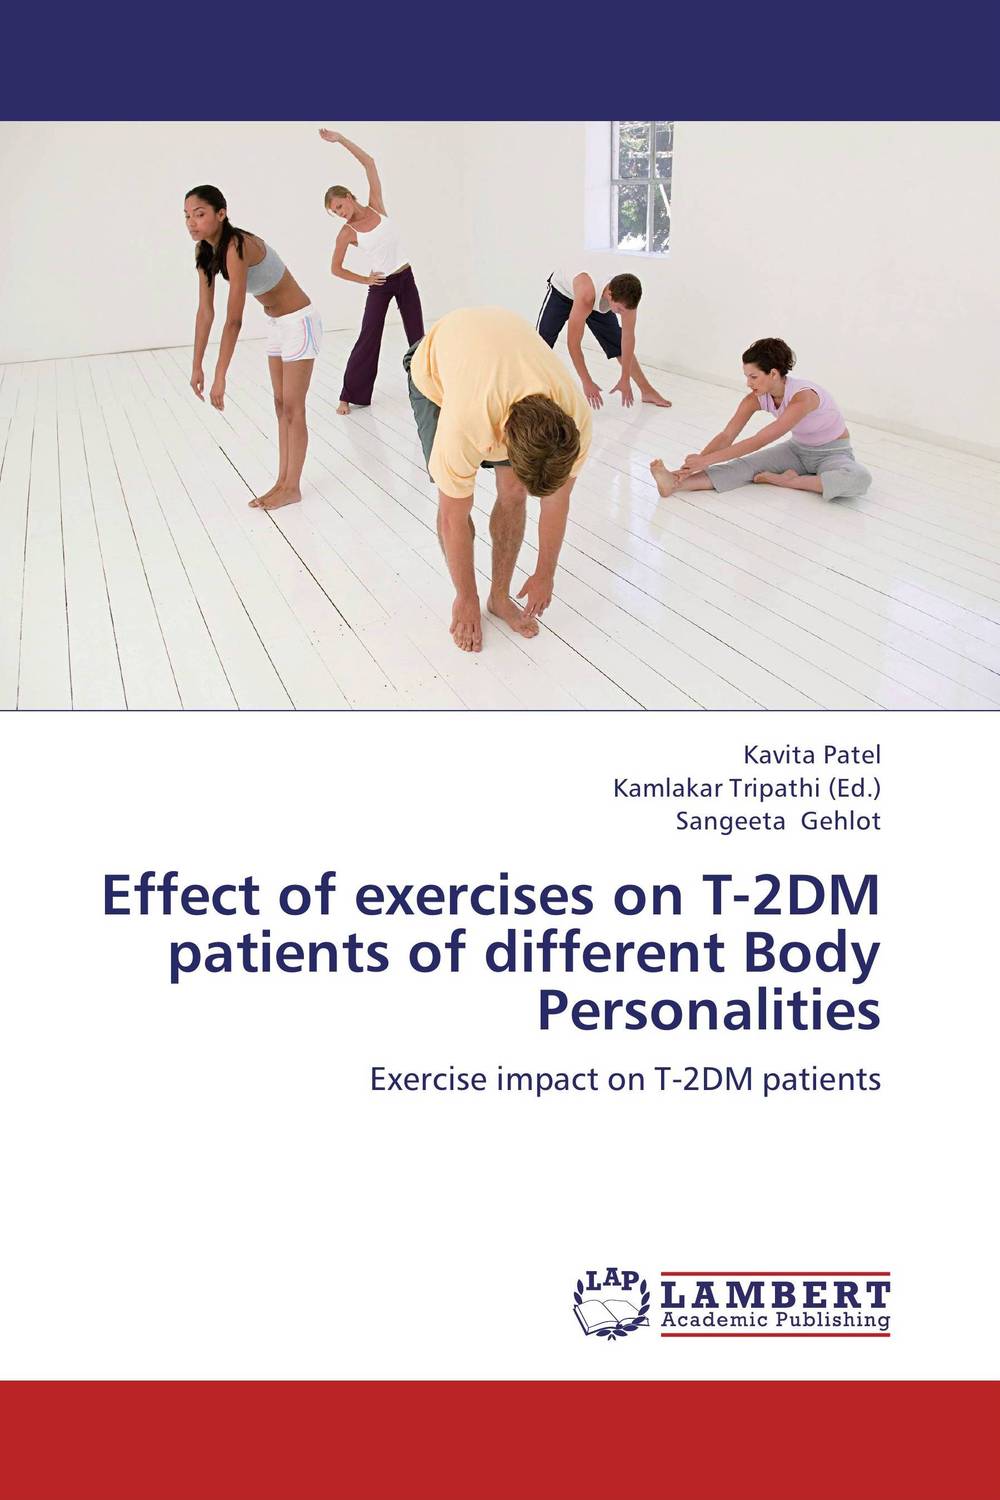 Effect of exercises on T-2DM patients of different Body Personalities